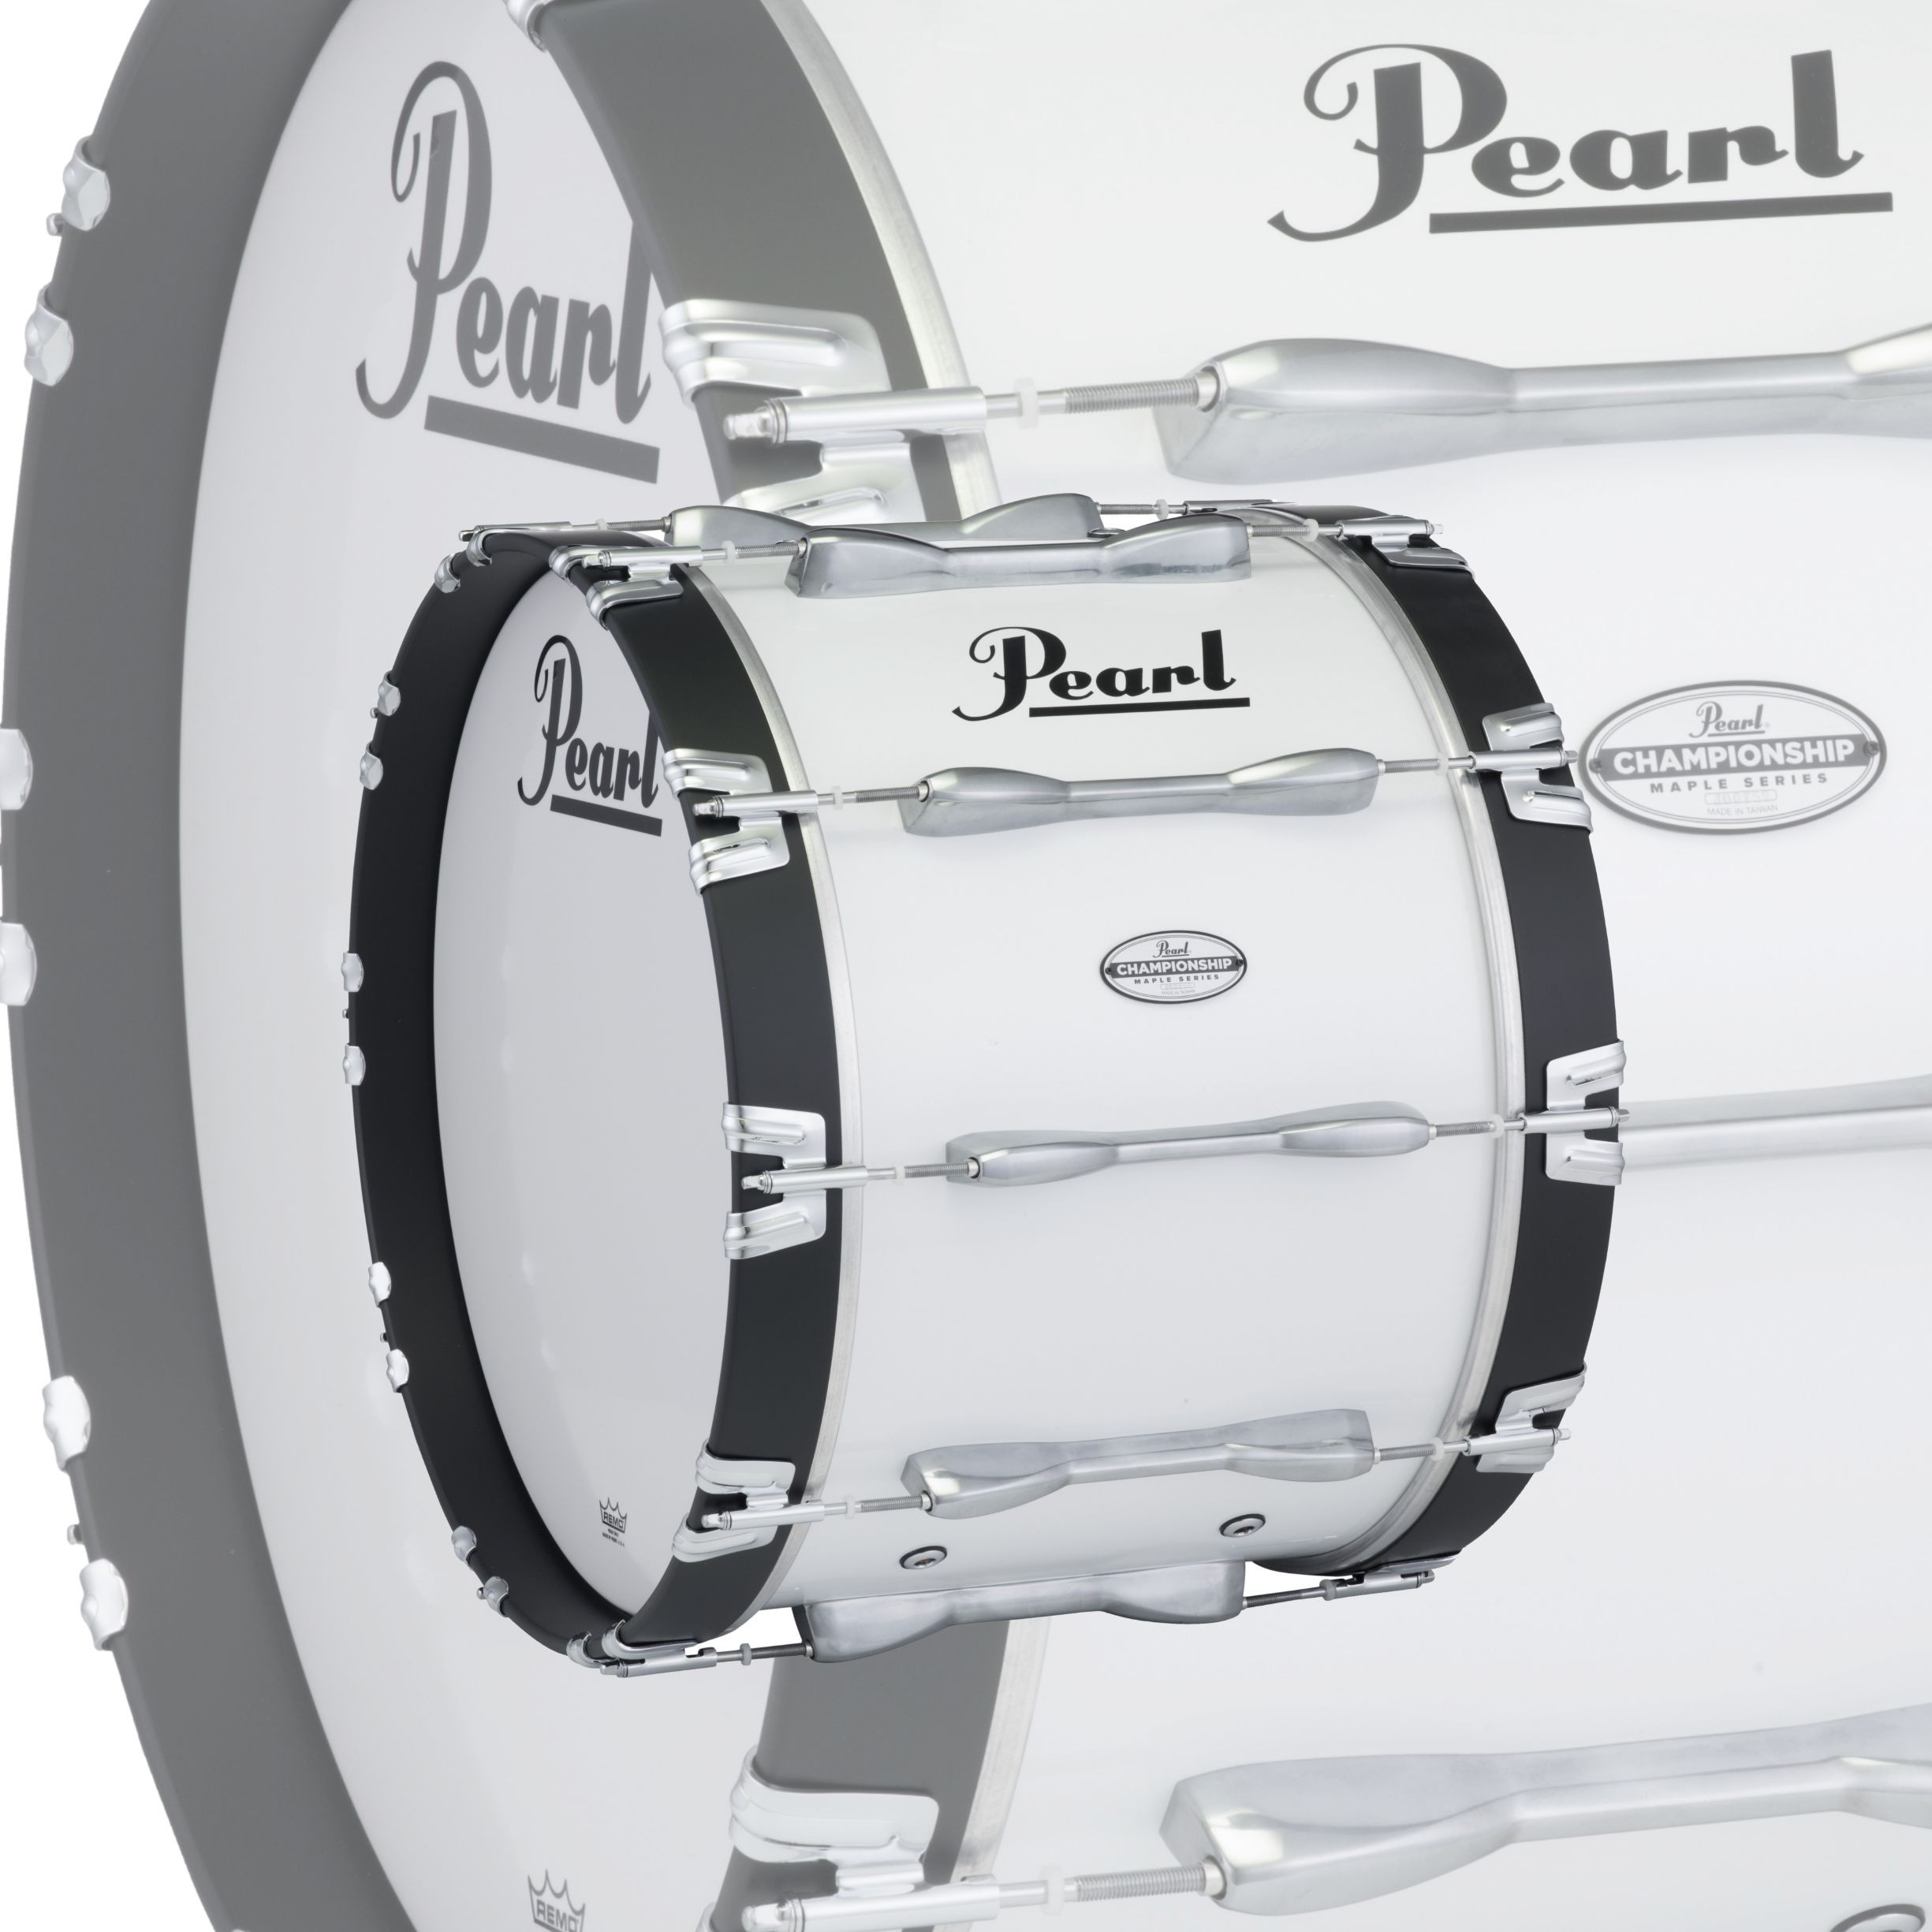 Pearl Maple Championship 26"x14" Marching Bass Drum